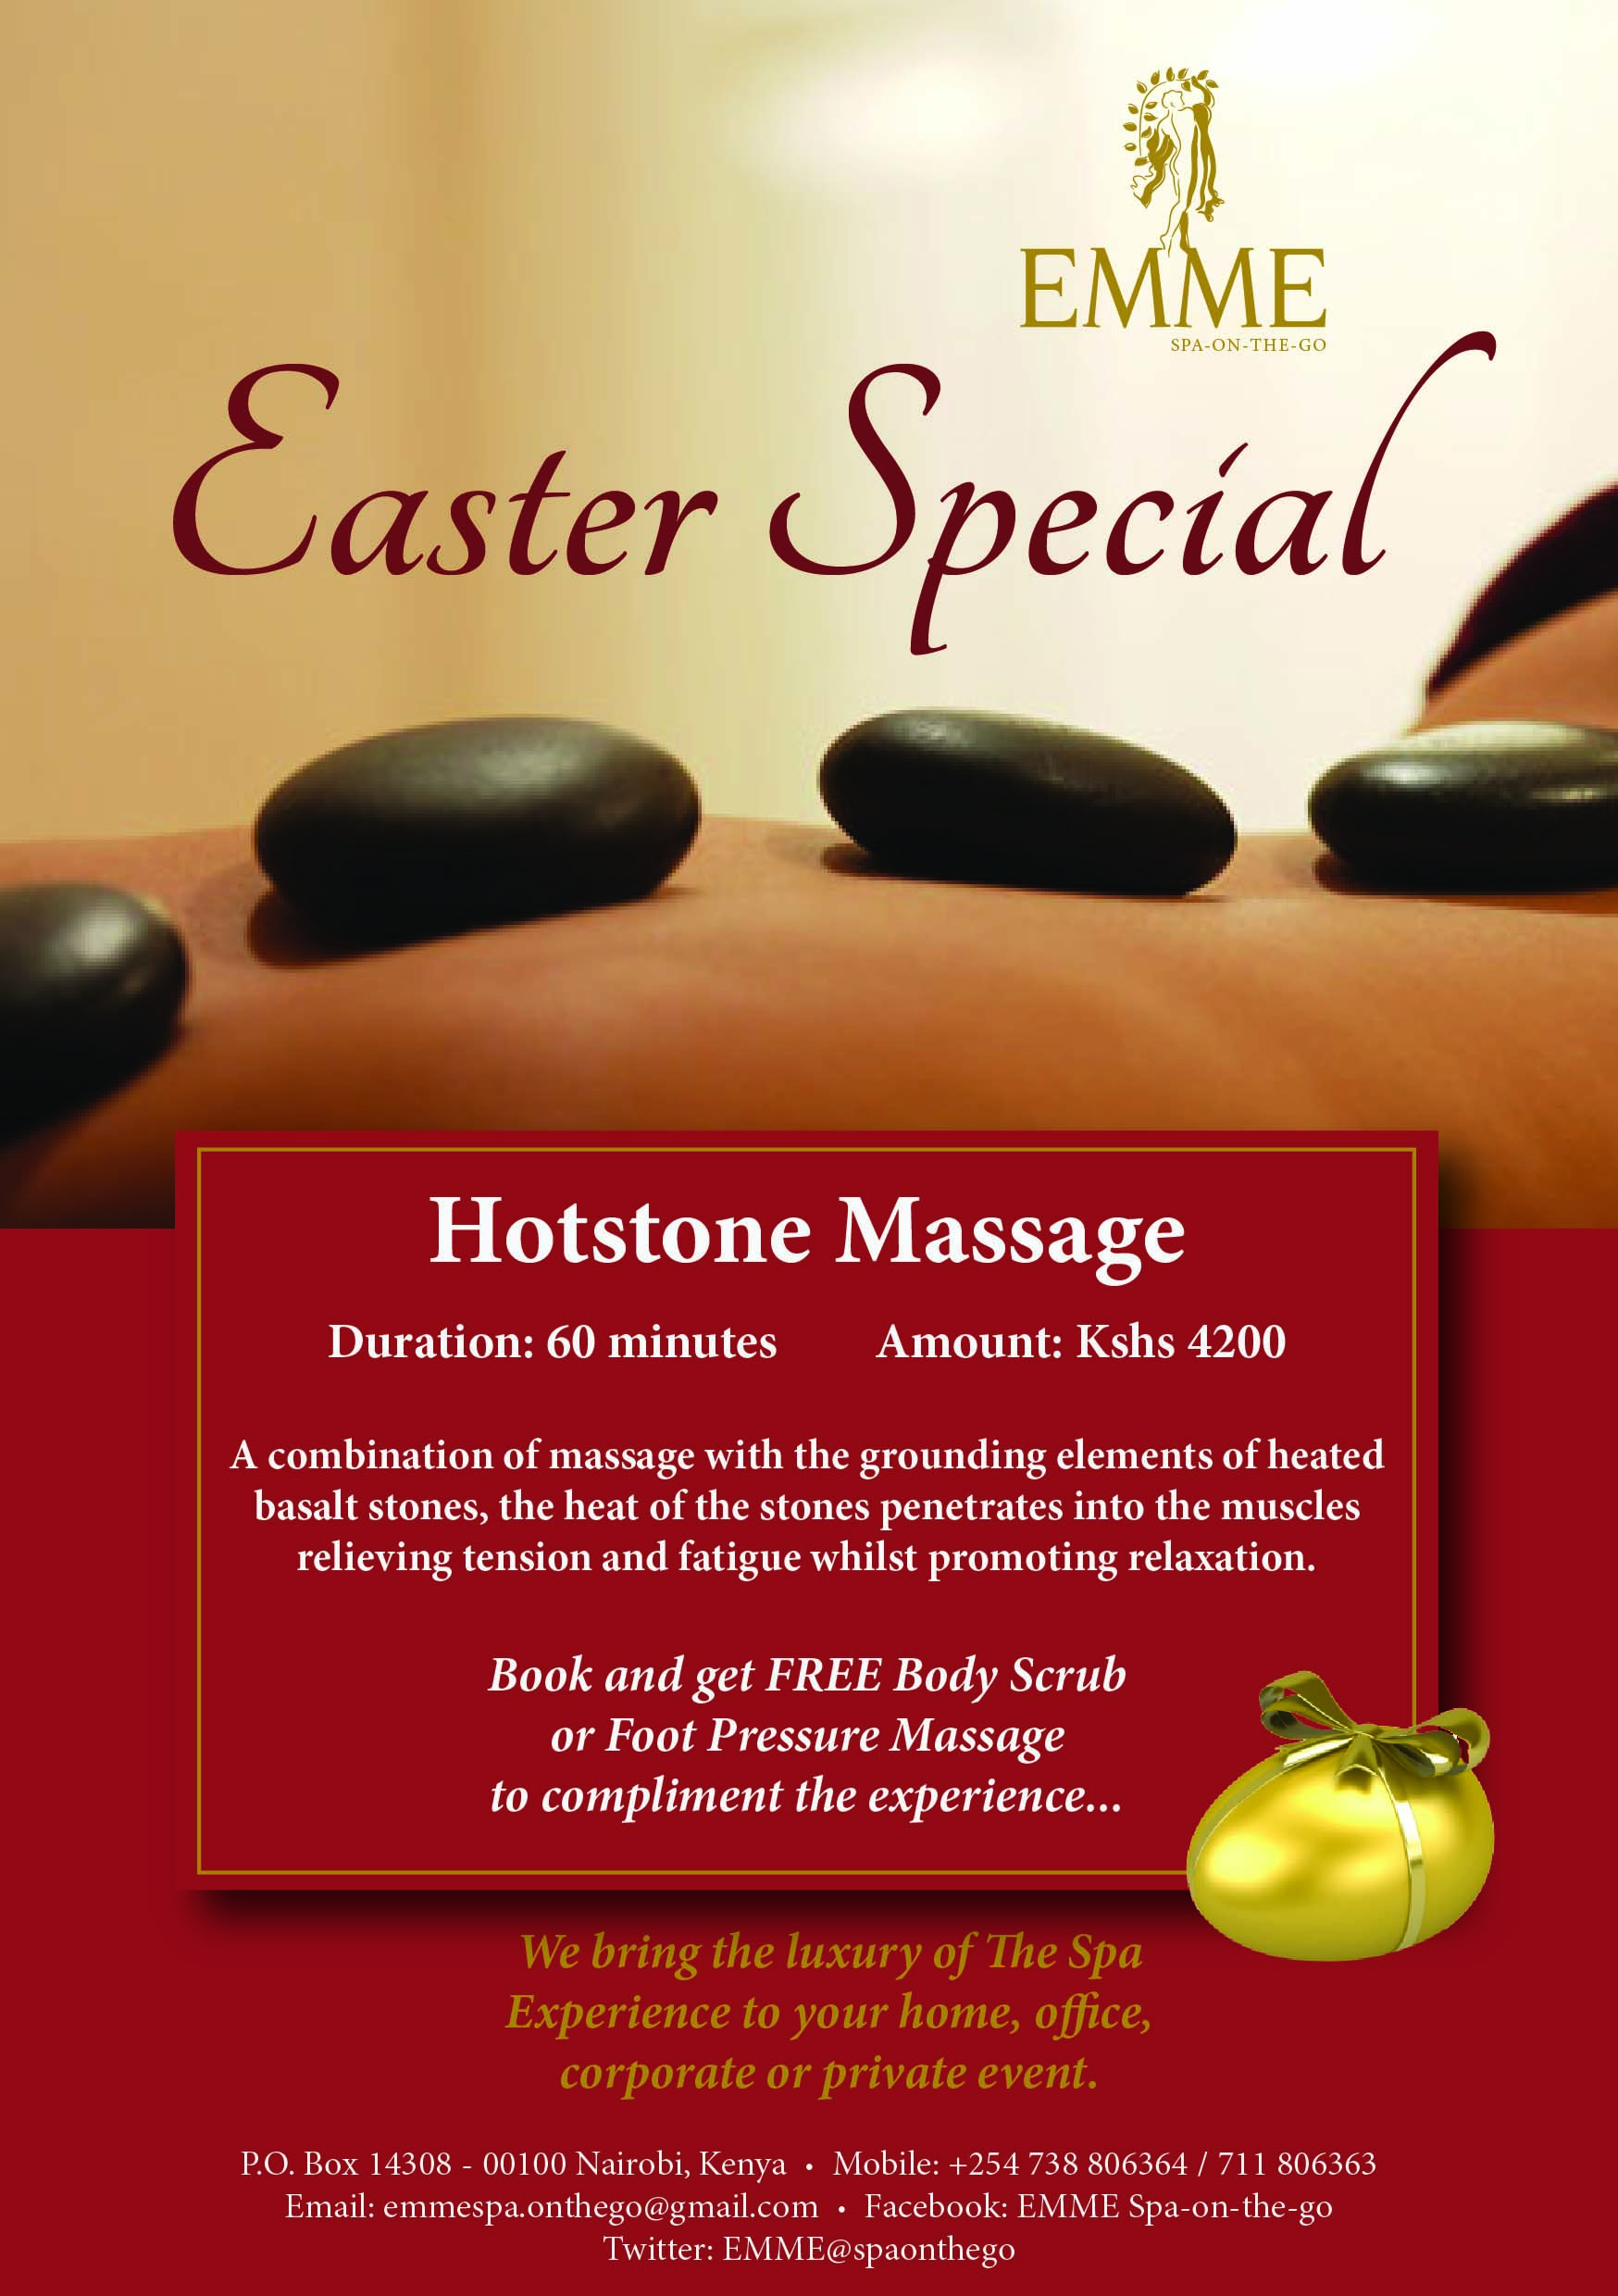 Easter special offer - seasonal offers